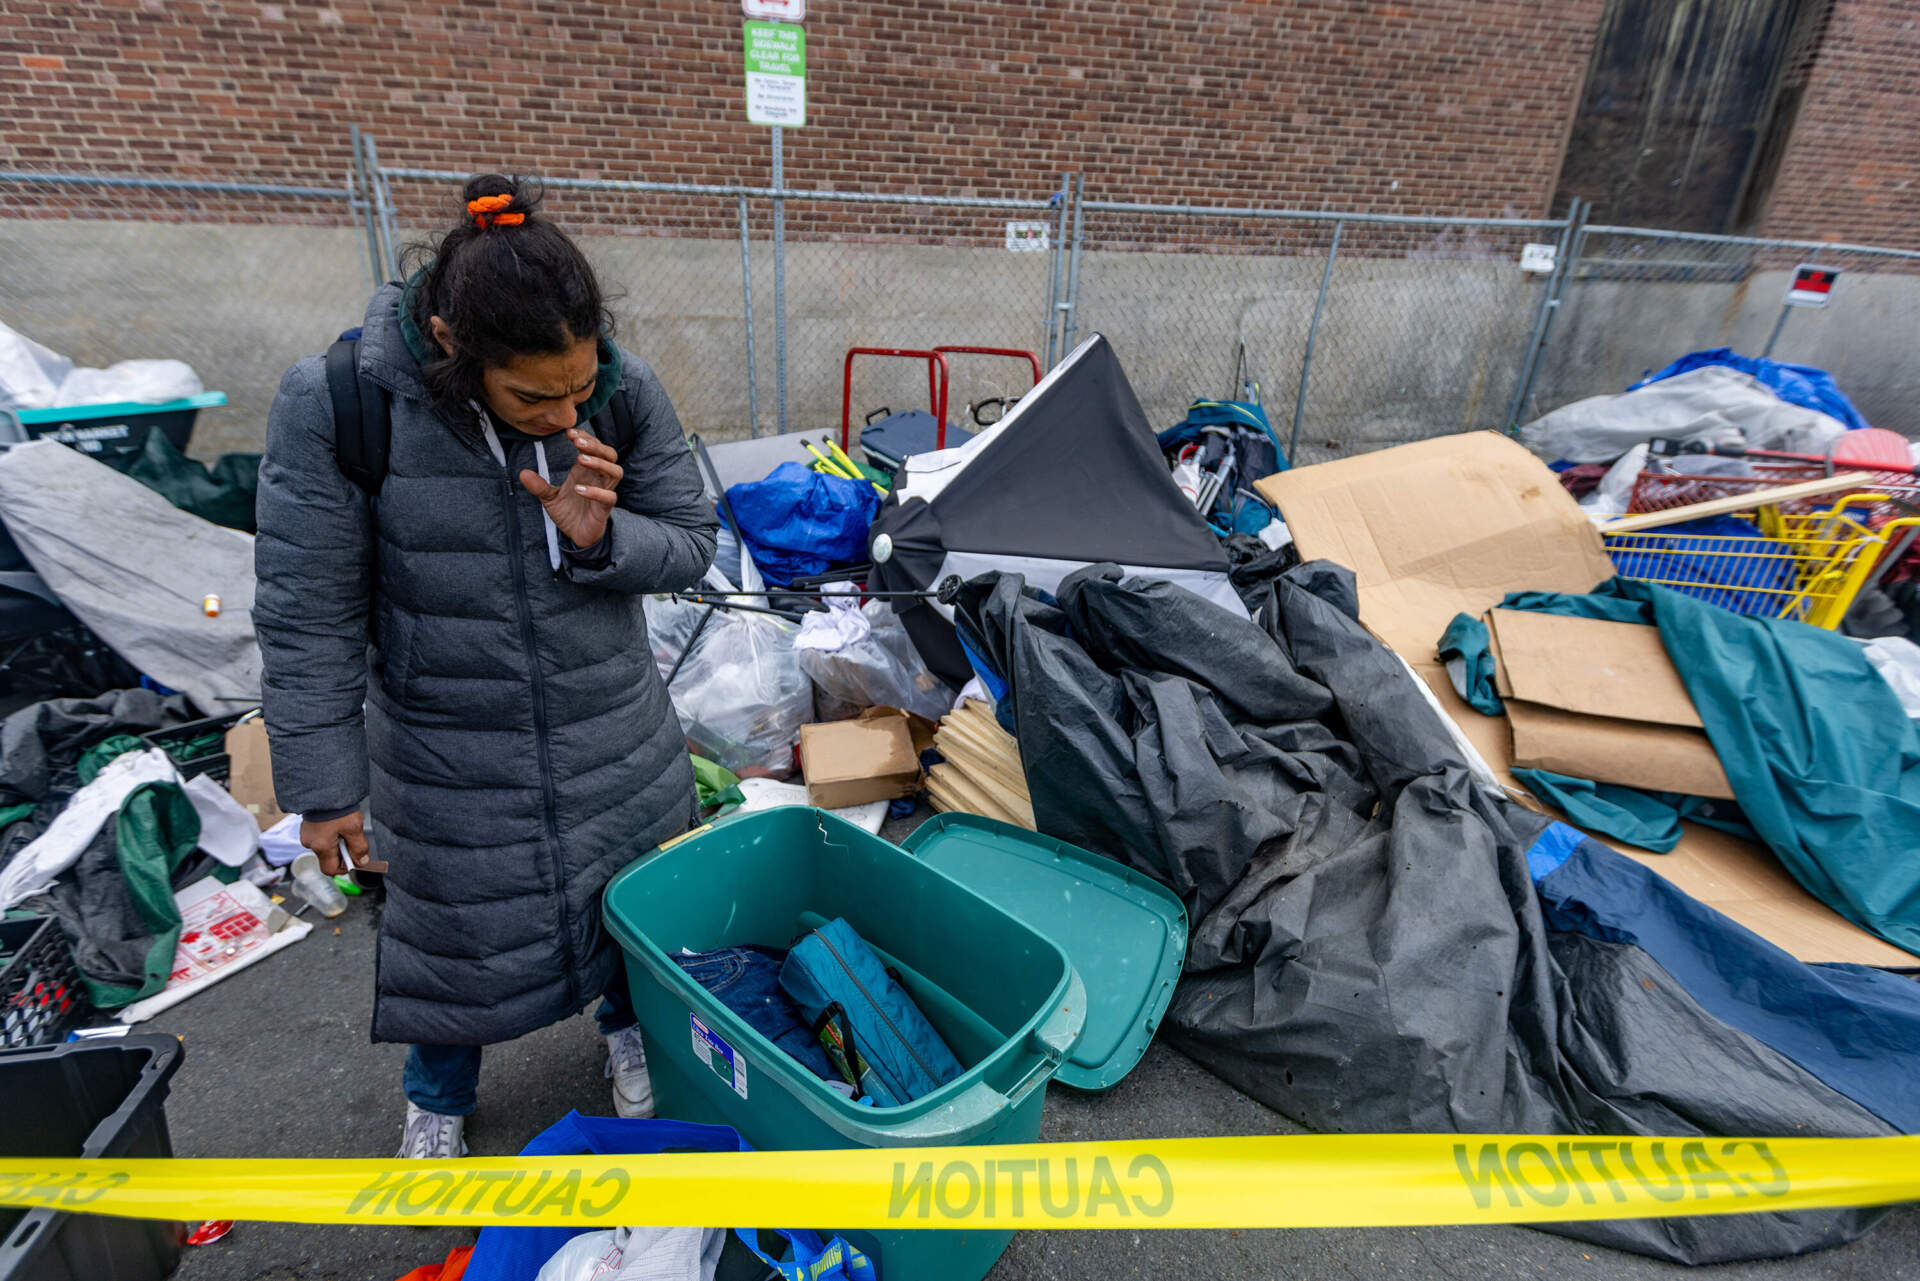 A woman is upset as she tries to sort through the belongings she wants to keep. (Jesse Costa/WBUR)